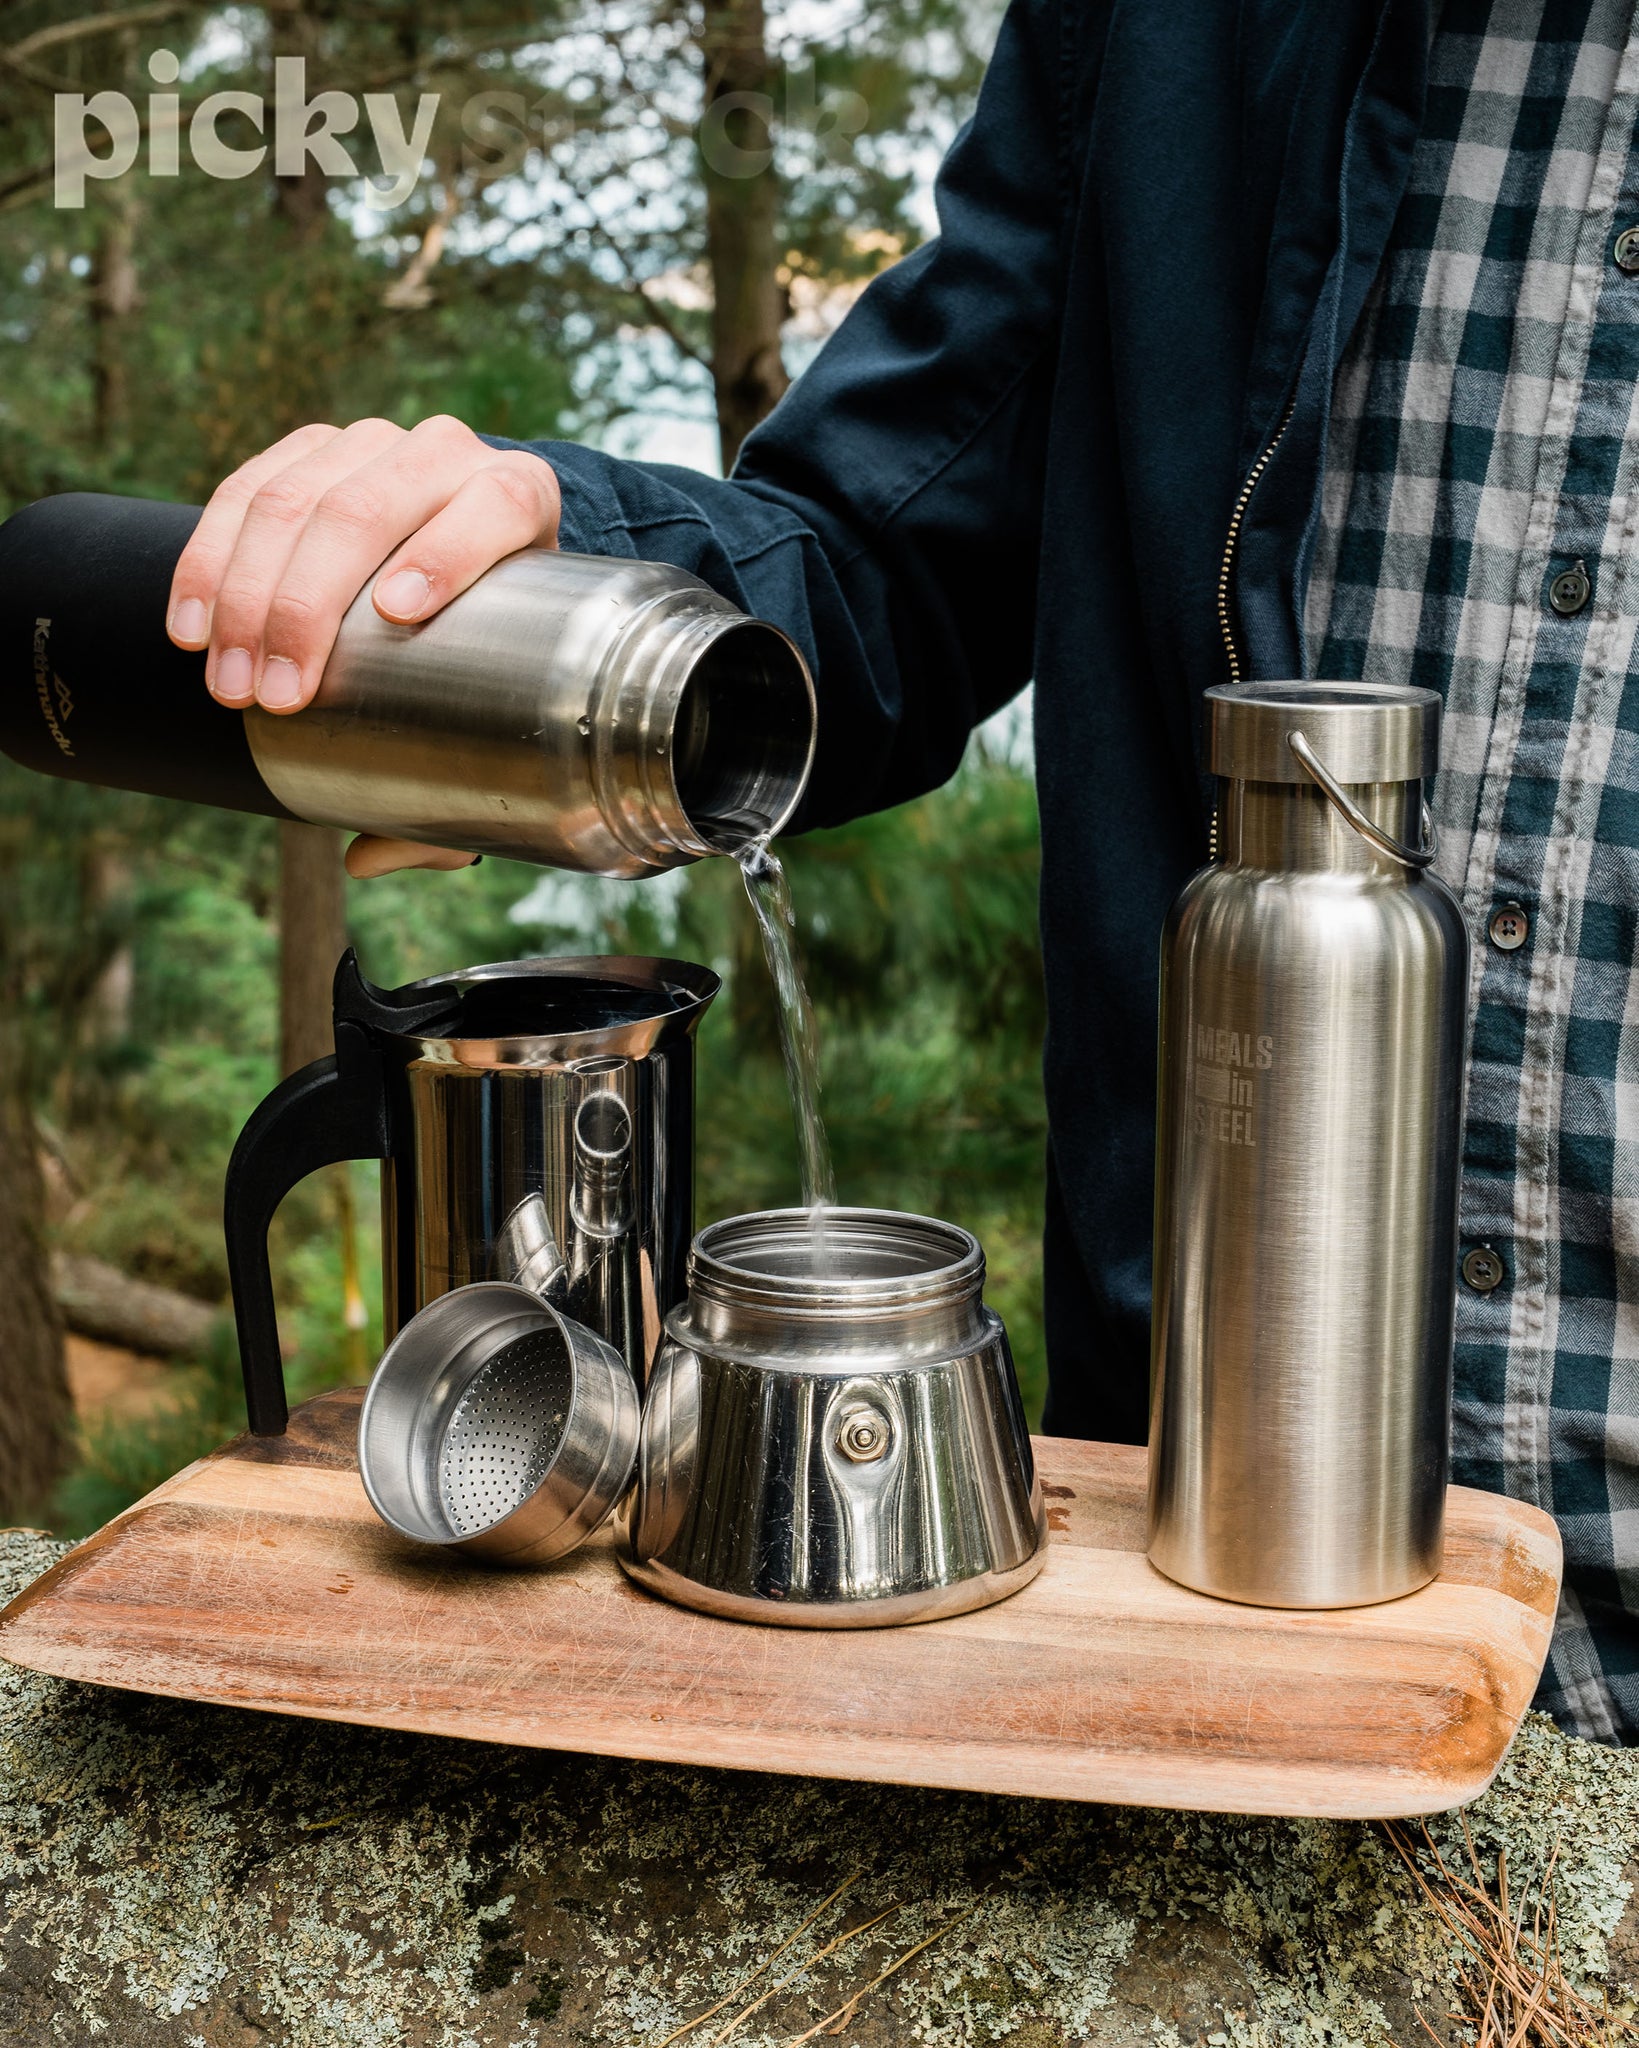 Man pouring water from stainless steel thermos into cooker to make coffee. Two grey mugs with green handles in the foreground. Man is wearing a blue jacket and light grey pants. Coffee maker, stainless steel water bottle is sitting on top of wooden chopping board, balancing on a log. Green trees and other greenery in background. 